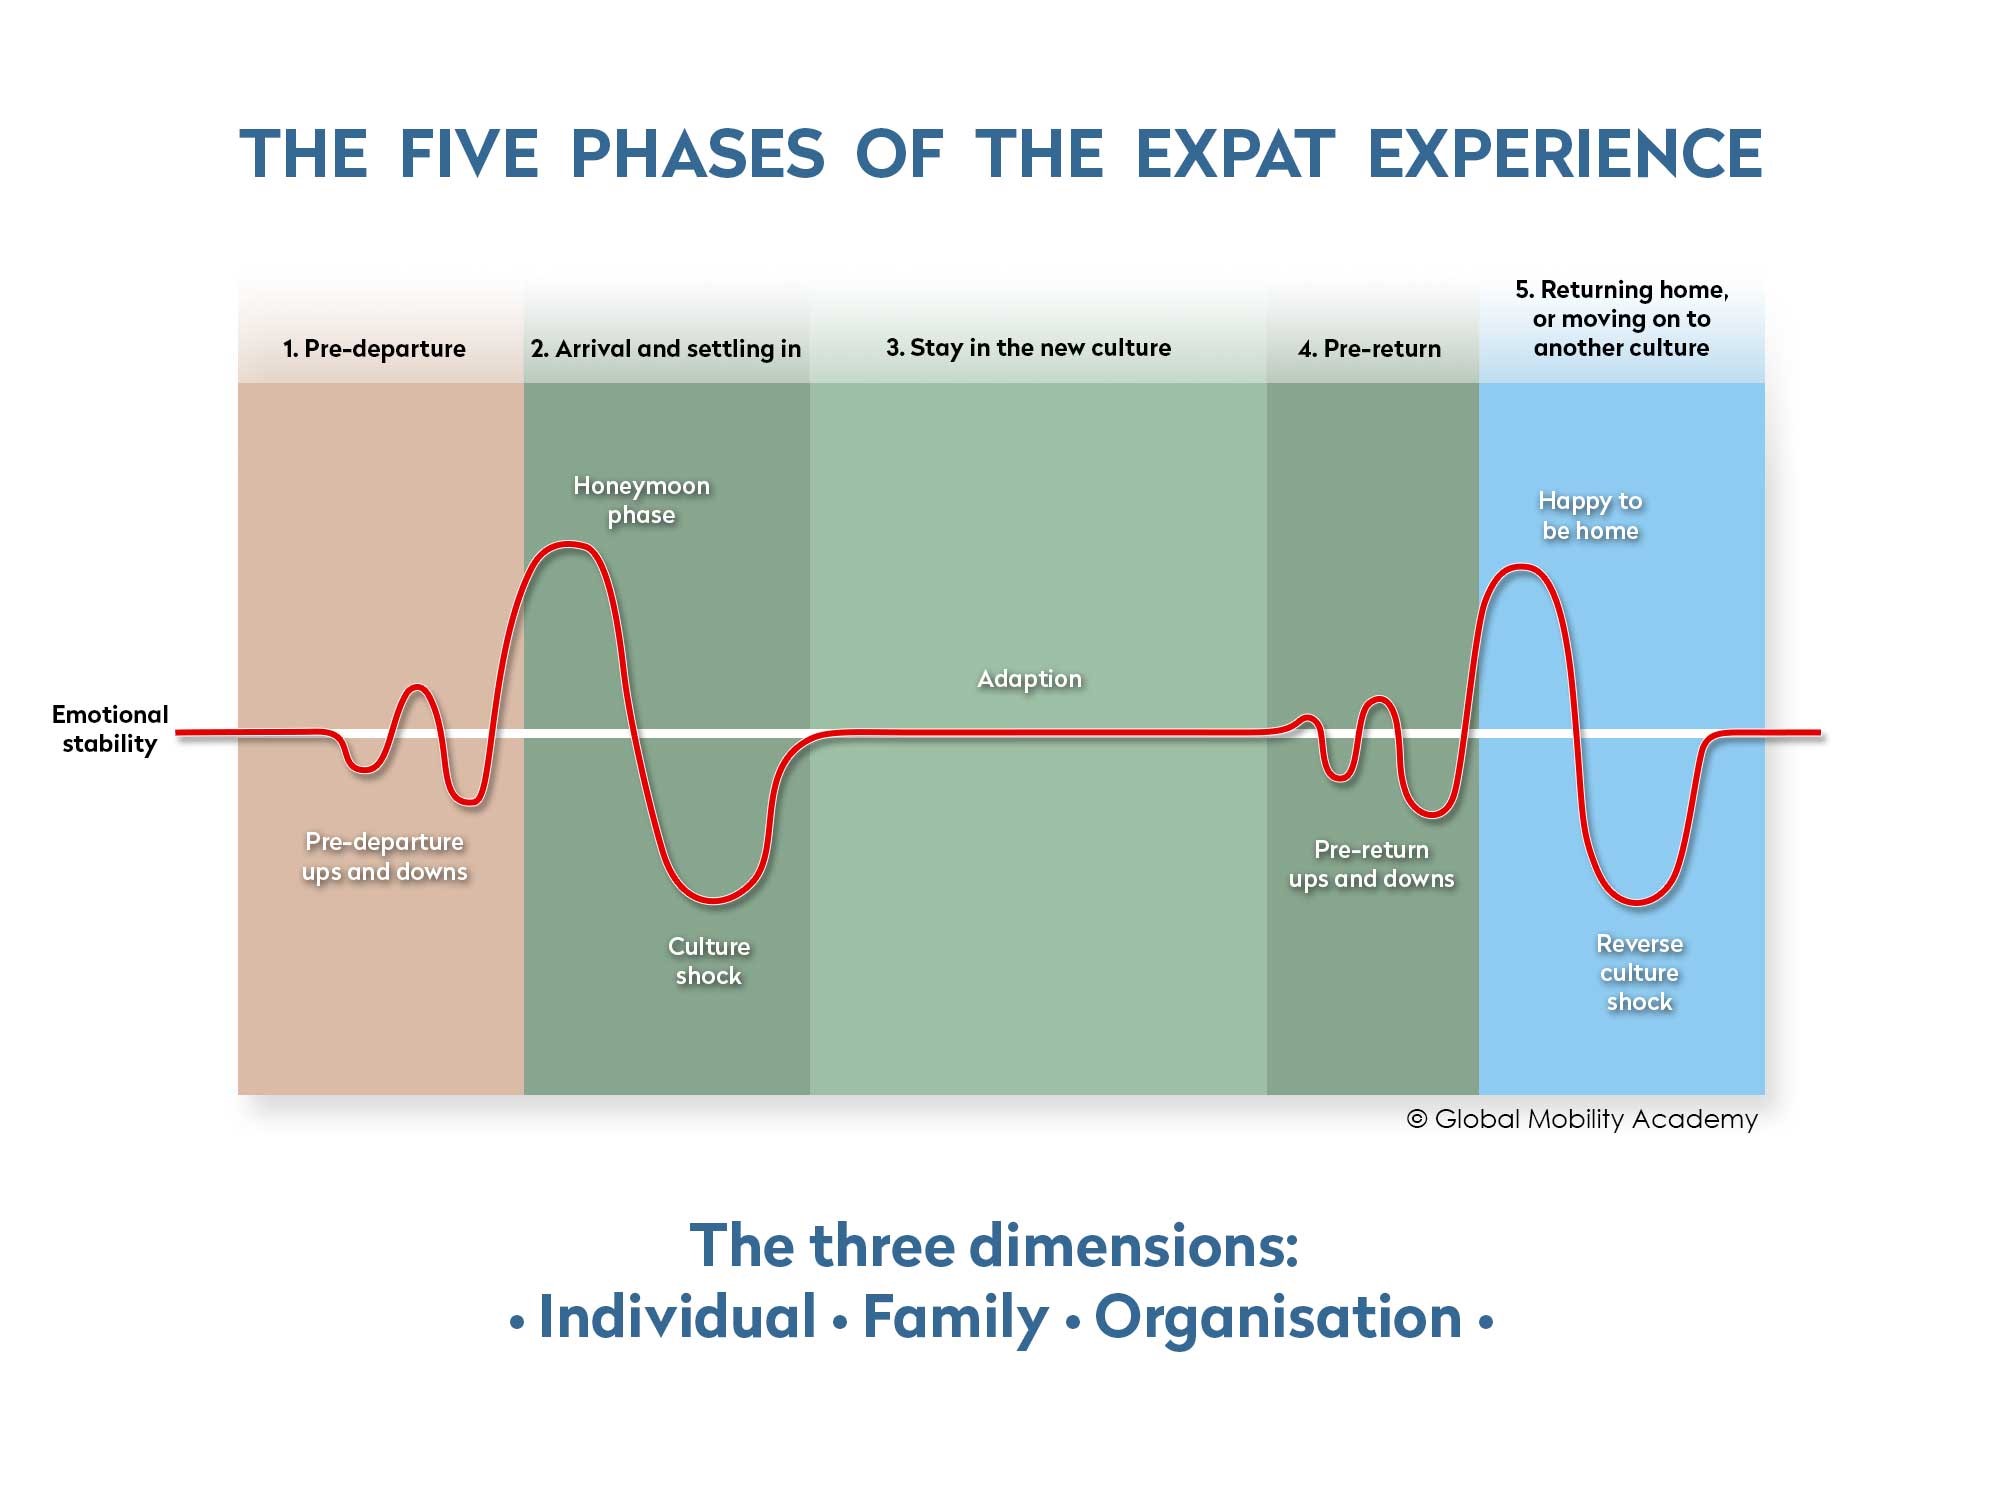 The Five Phases of the Expat Experience